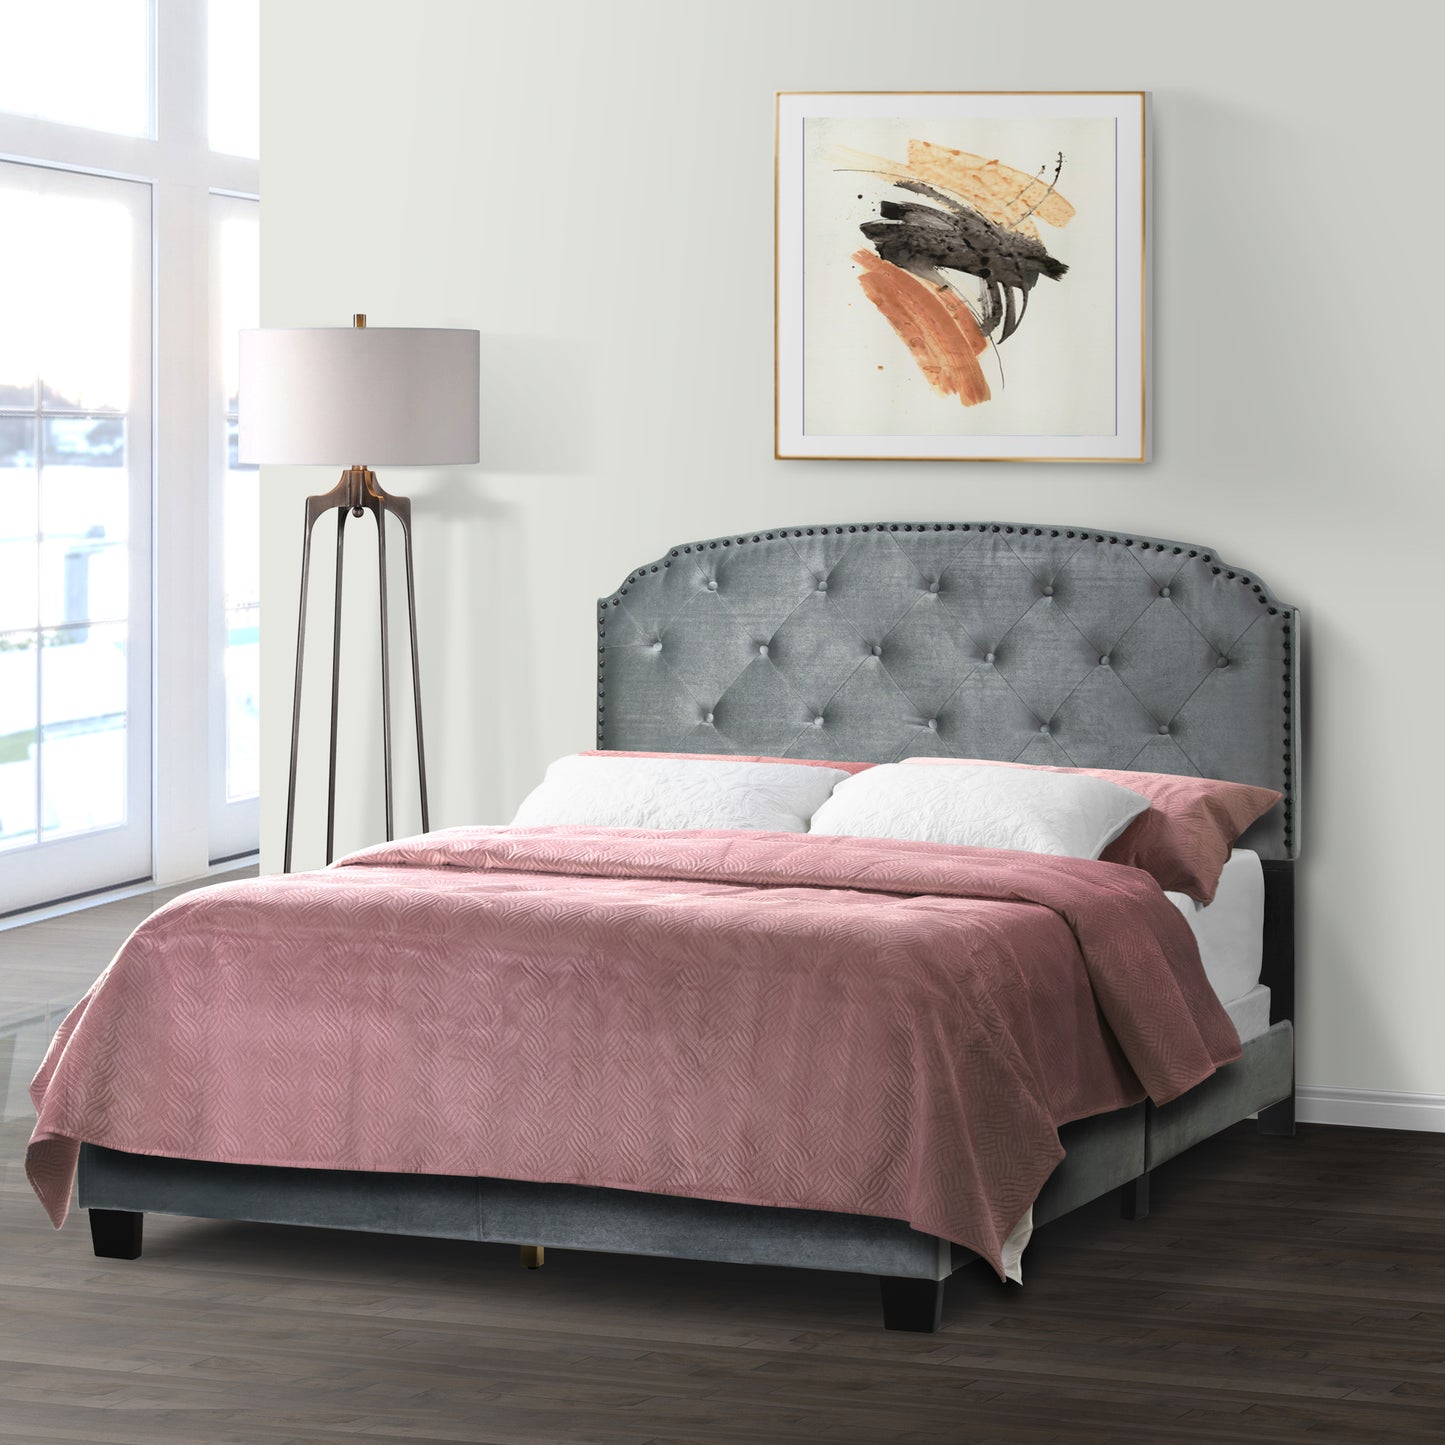 Arin Silver Grey Velvet Queen Bed with Button Tufting and Black Nail Head Trim